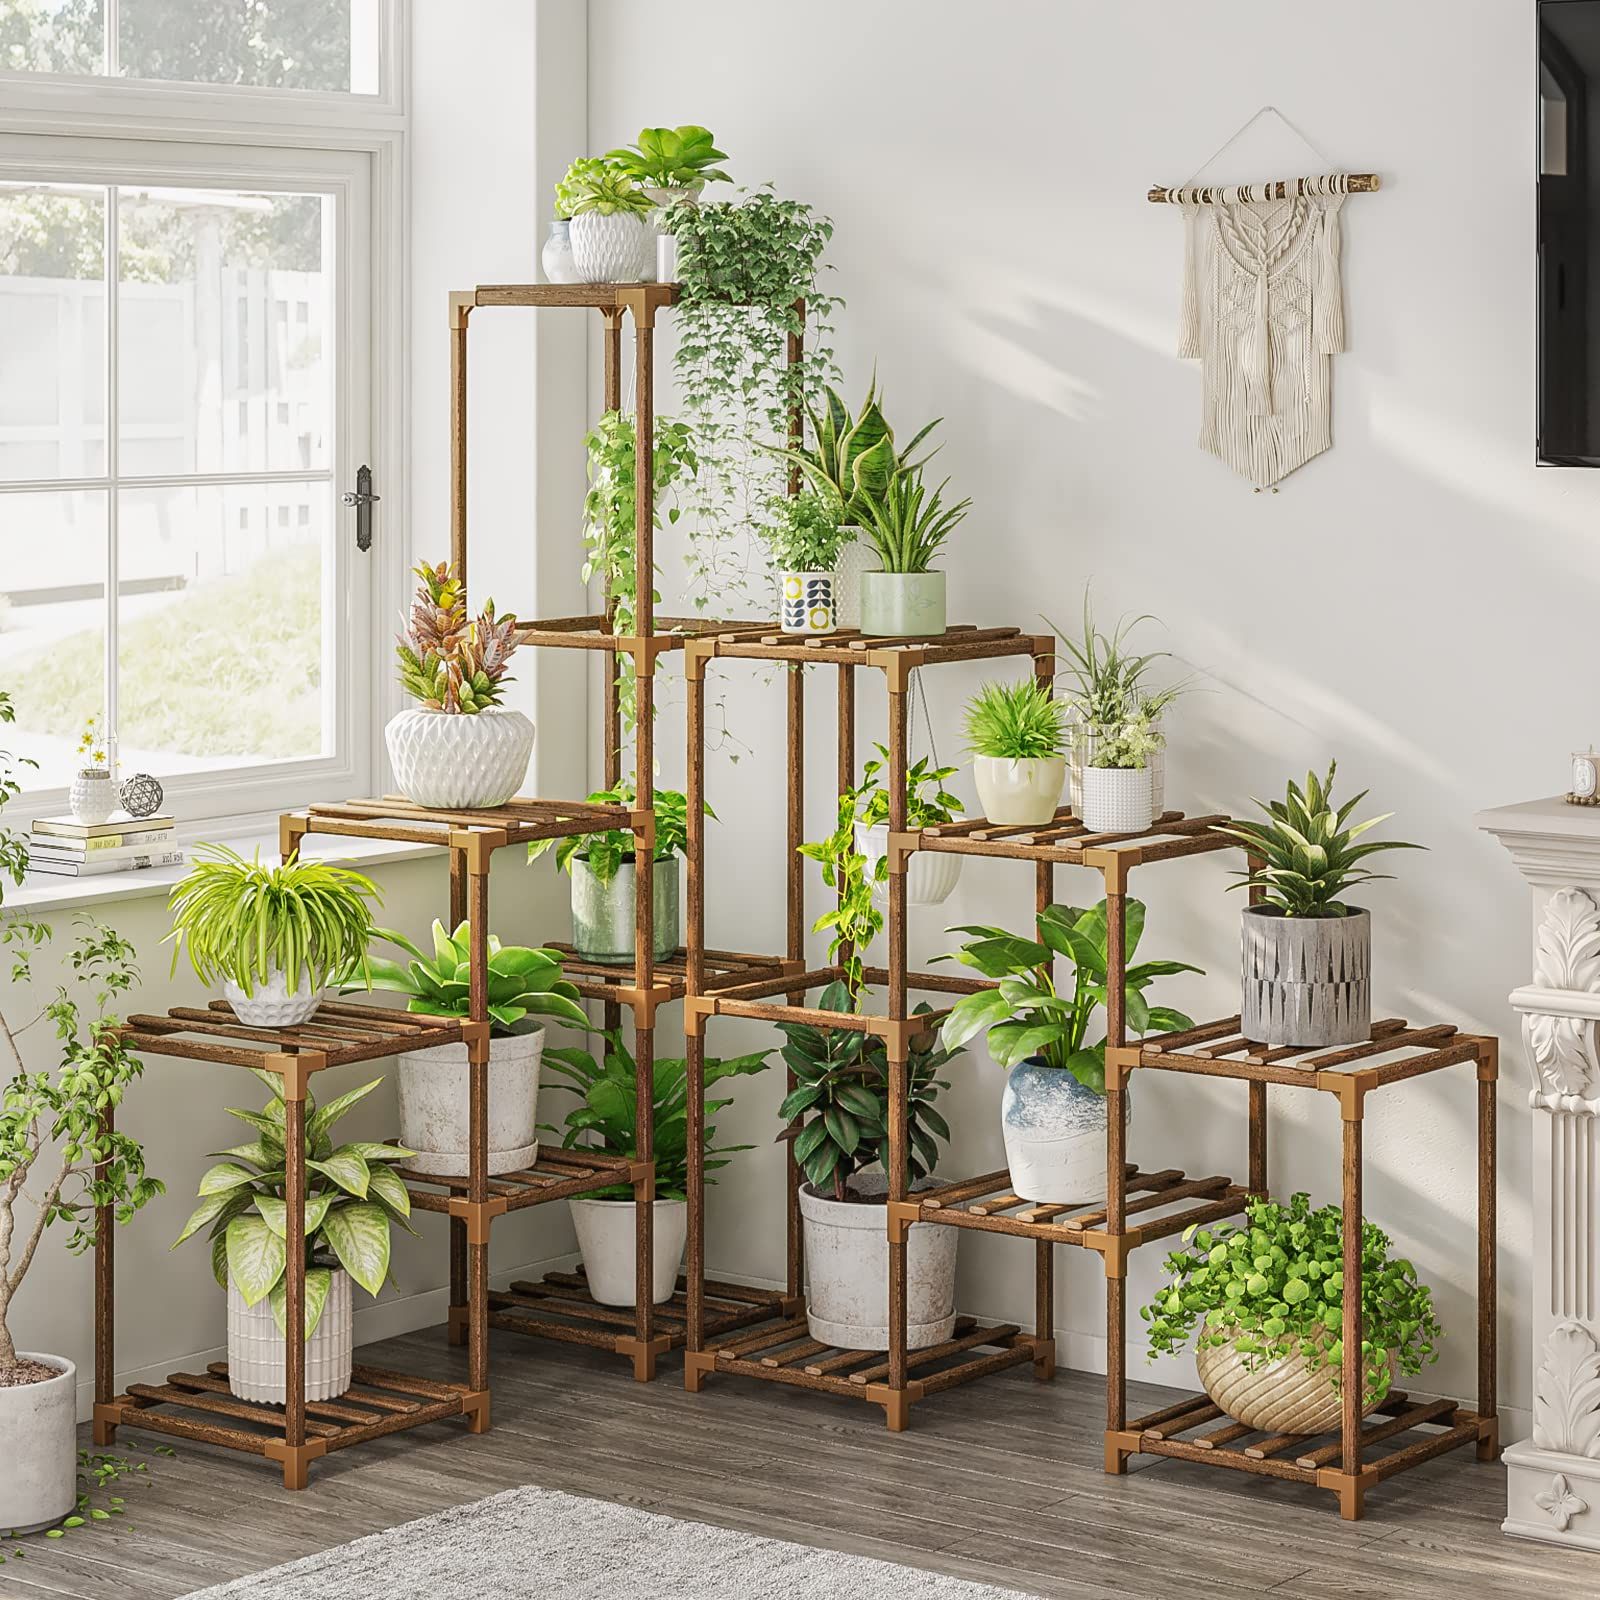 Favorite Wooden Plant Stands Pertaining To Amazon: Bamworld Plant Stand Indoor Corner Plant Shelf Outdoor Flower  Shelves Wooden Plant Stands Garden Wood Plant Holder Rack For Living Room  Corner Lawn Window 03b : Everything Else (View 6 of 15)